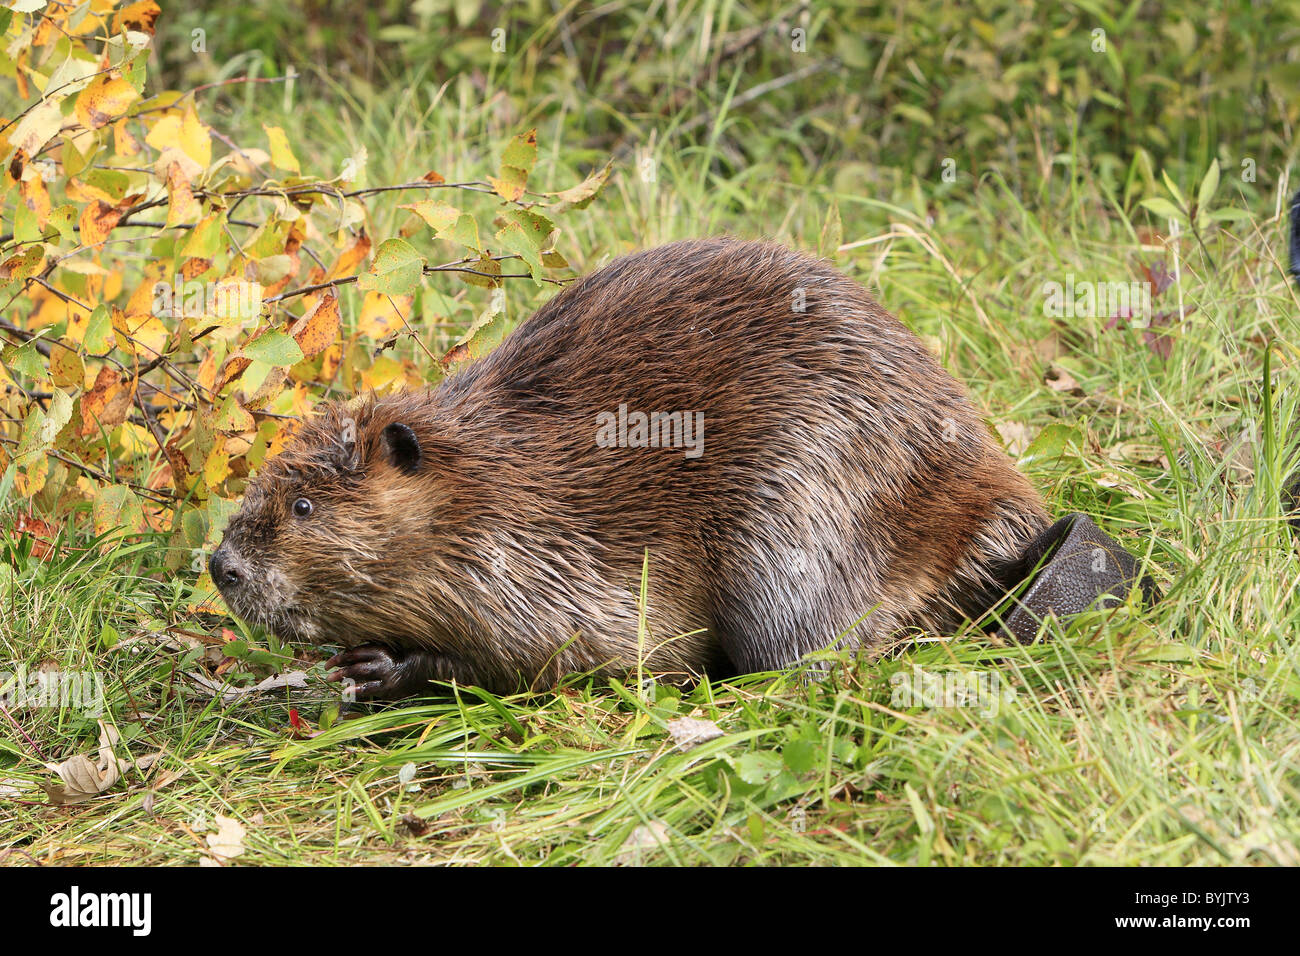 American Beaver, Canadian Beaver (Castor canadensis) on a bank, next to branches. Stock Photo